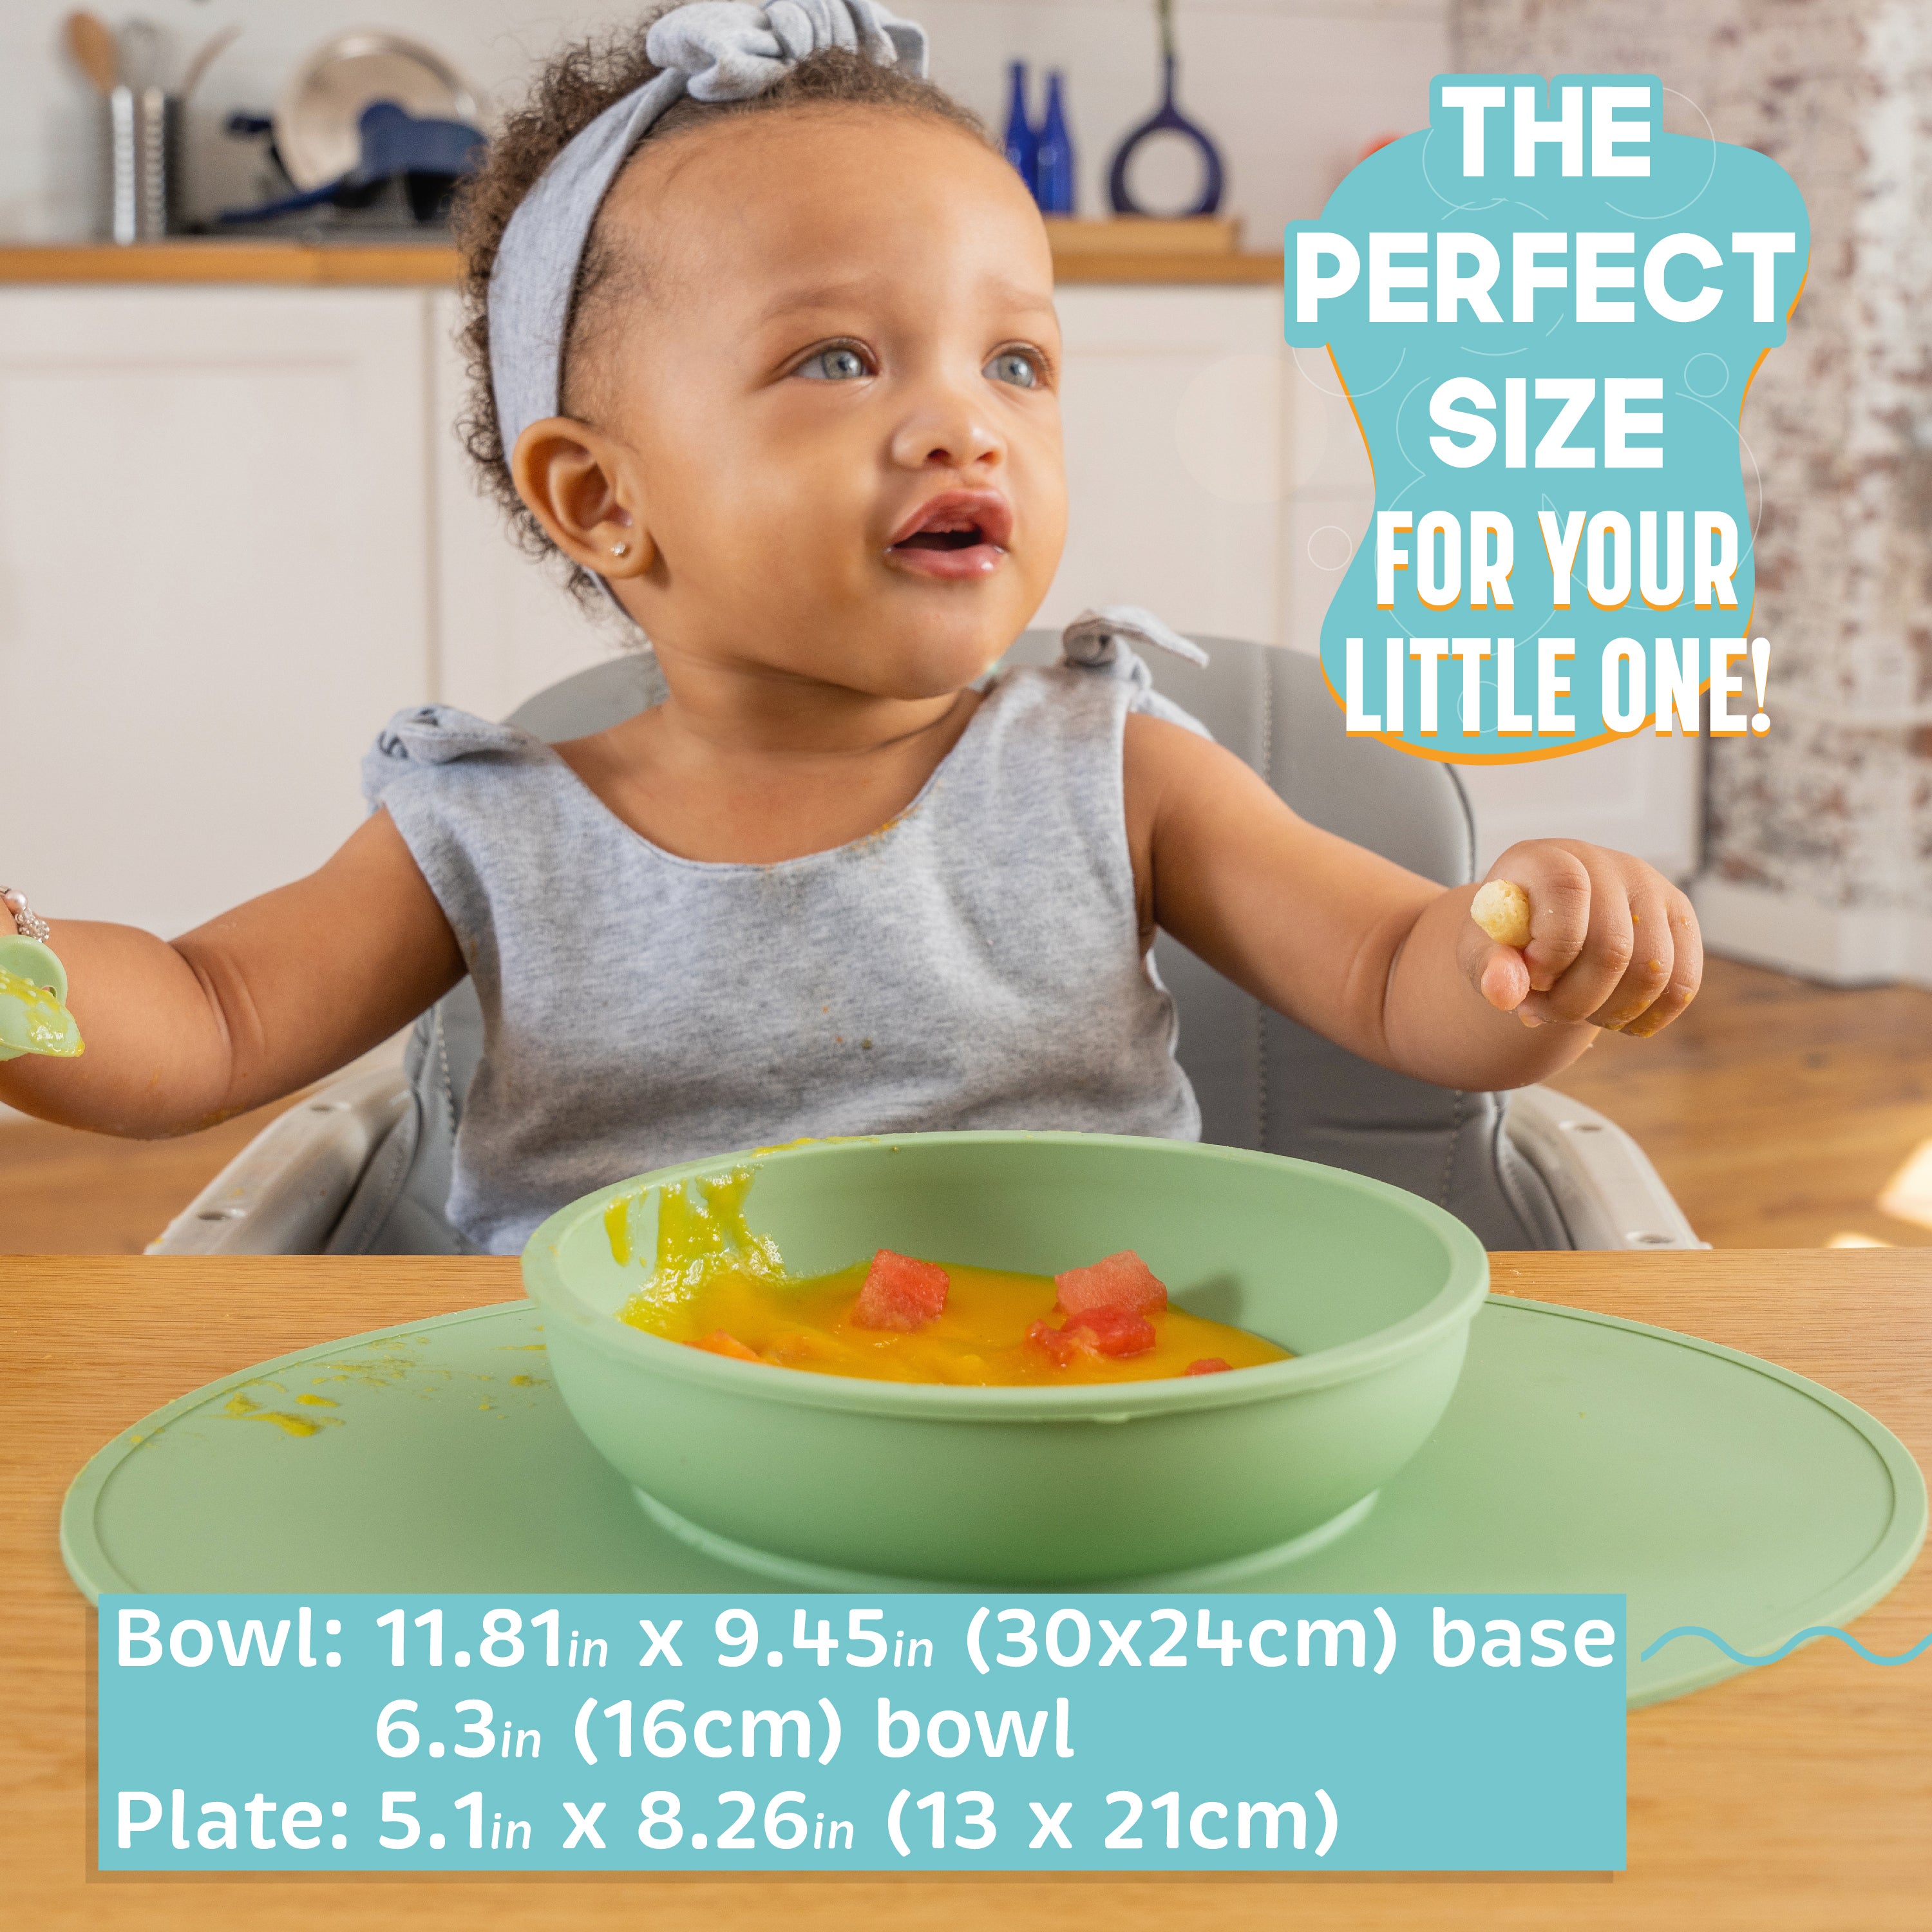 Baby Led Weaning Feeding Supplies for Toddlers - UpwardBaby Baby Feeding  Set - Suction Silicone Baby Bowl - Self Eating Utensils Set with Spoons,  Bibs, Placemat - Dishwasher-Safe Infant Food Plate Kit 